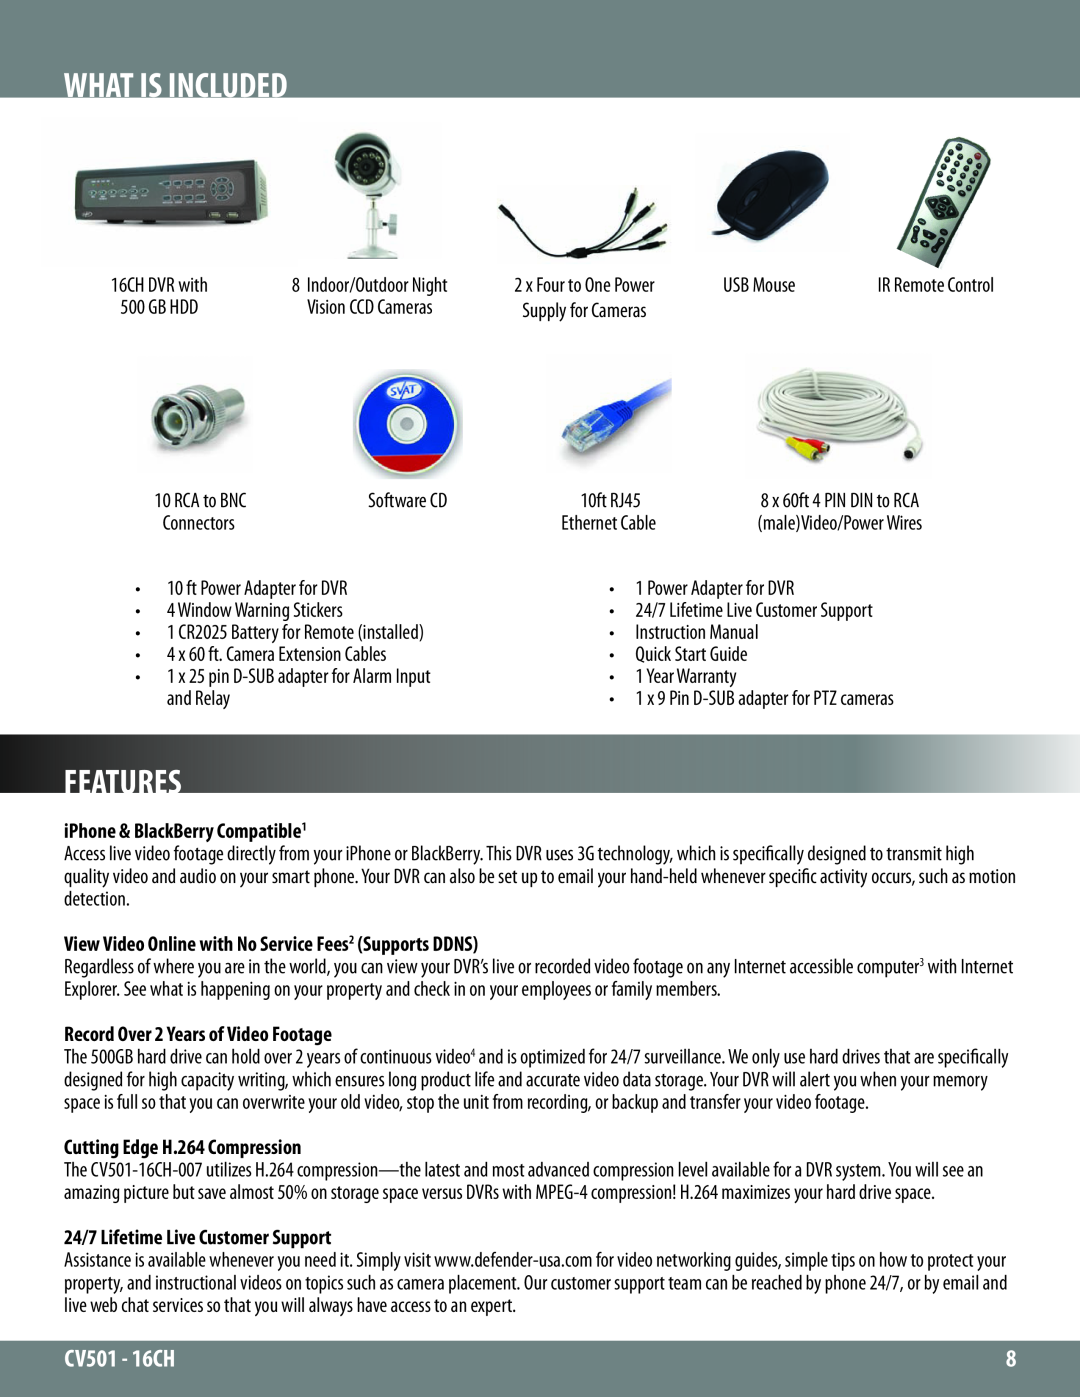 SVAT Electronics CV501 - 16CH What Is Included, Features, iPhone & BlackBerry Compatible1, Cutting Edge H.264 Compression 